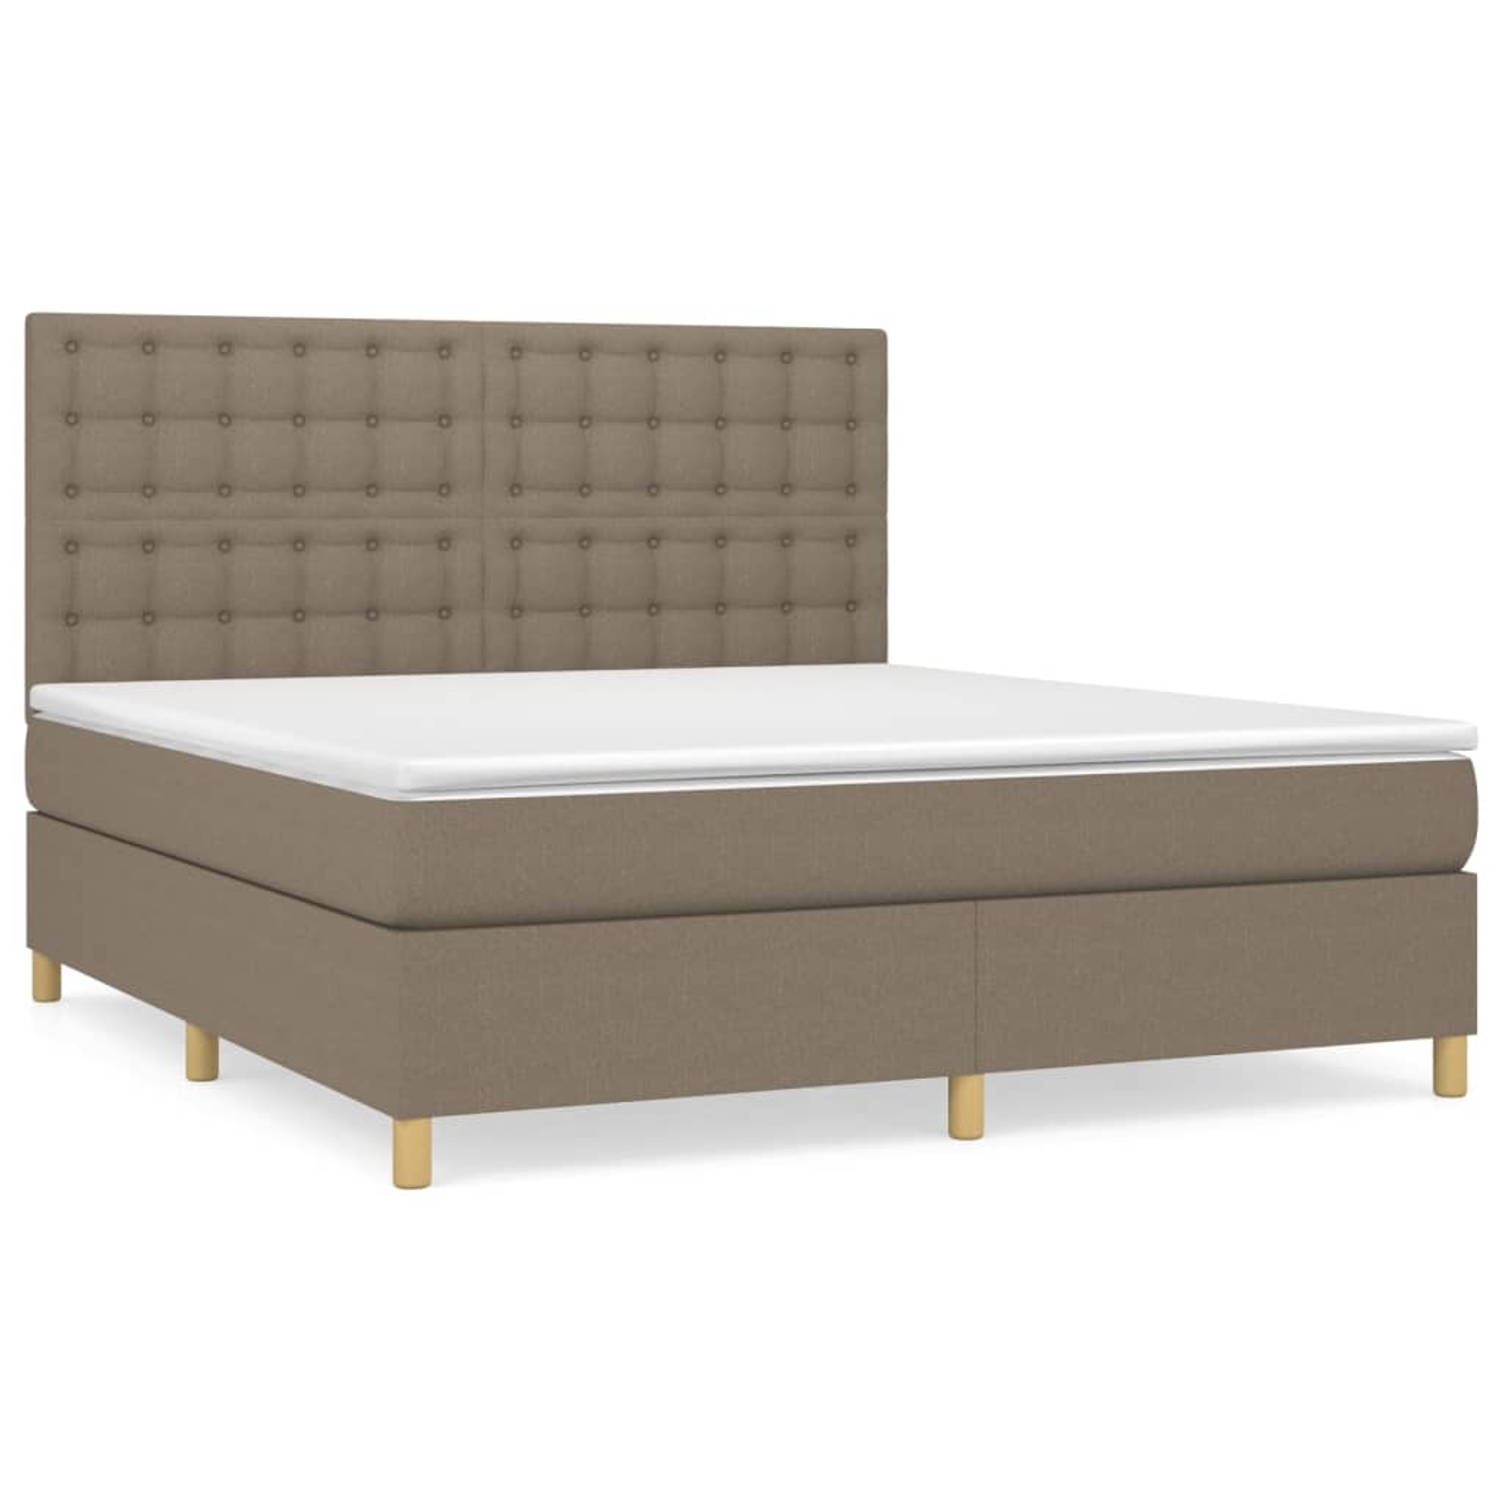 The Living Store - Boxspringbed - 180 x 200 - Taupe - Pocketvering - Middelharde ondersteuning